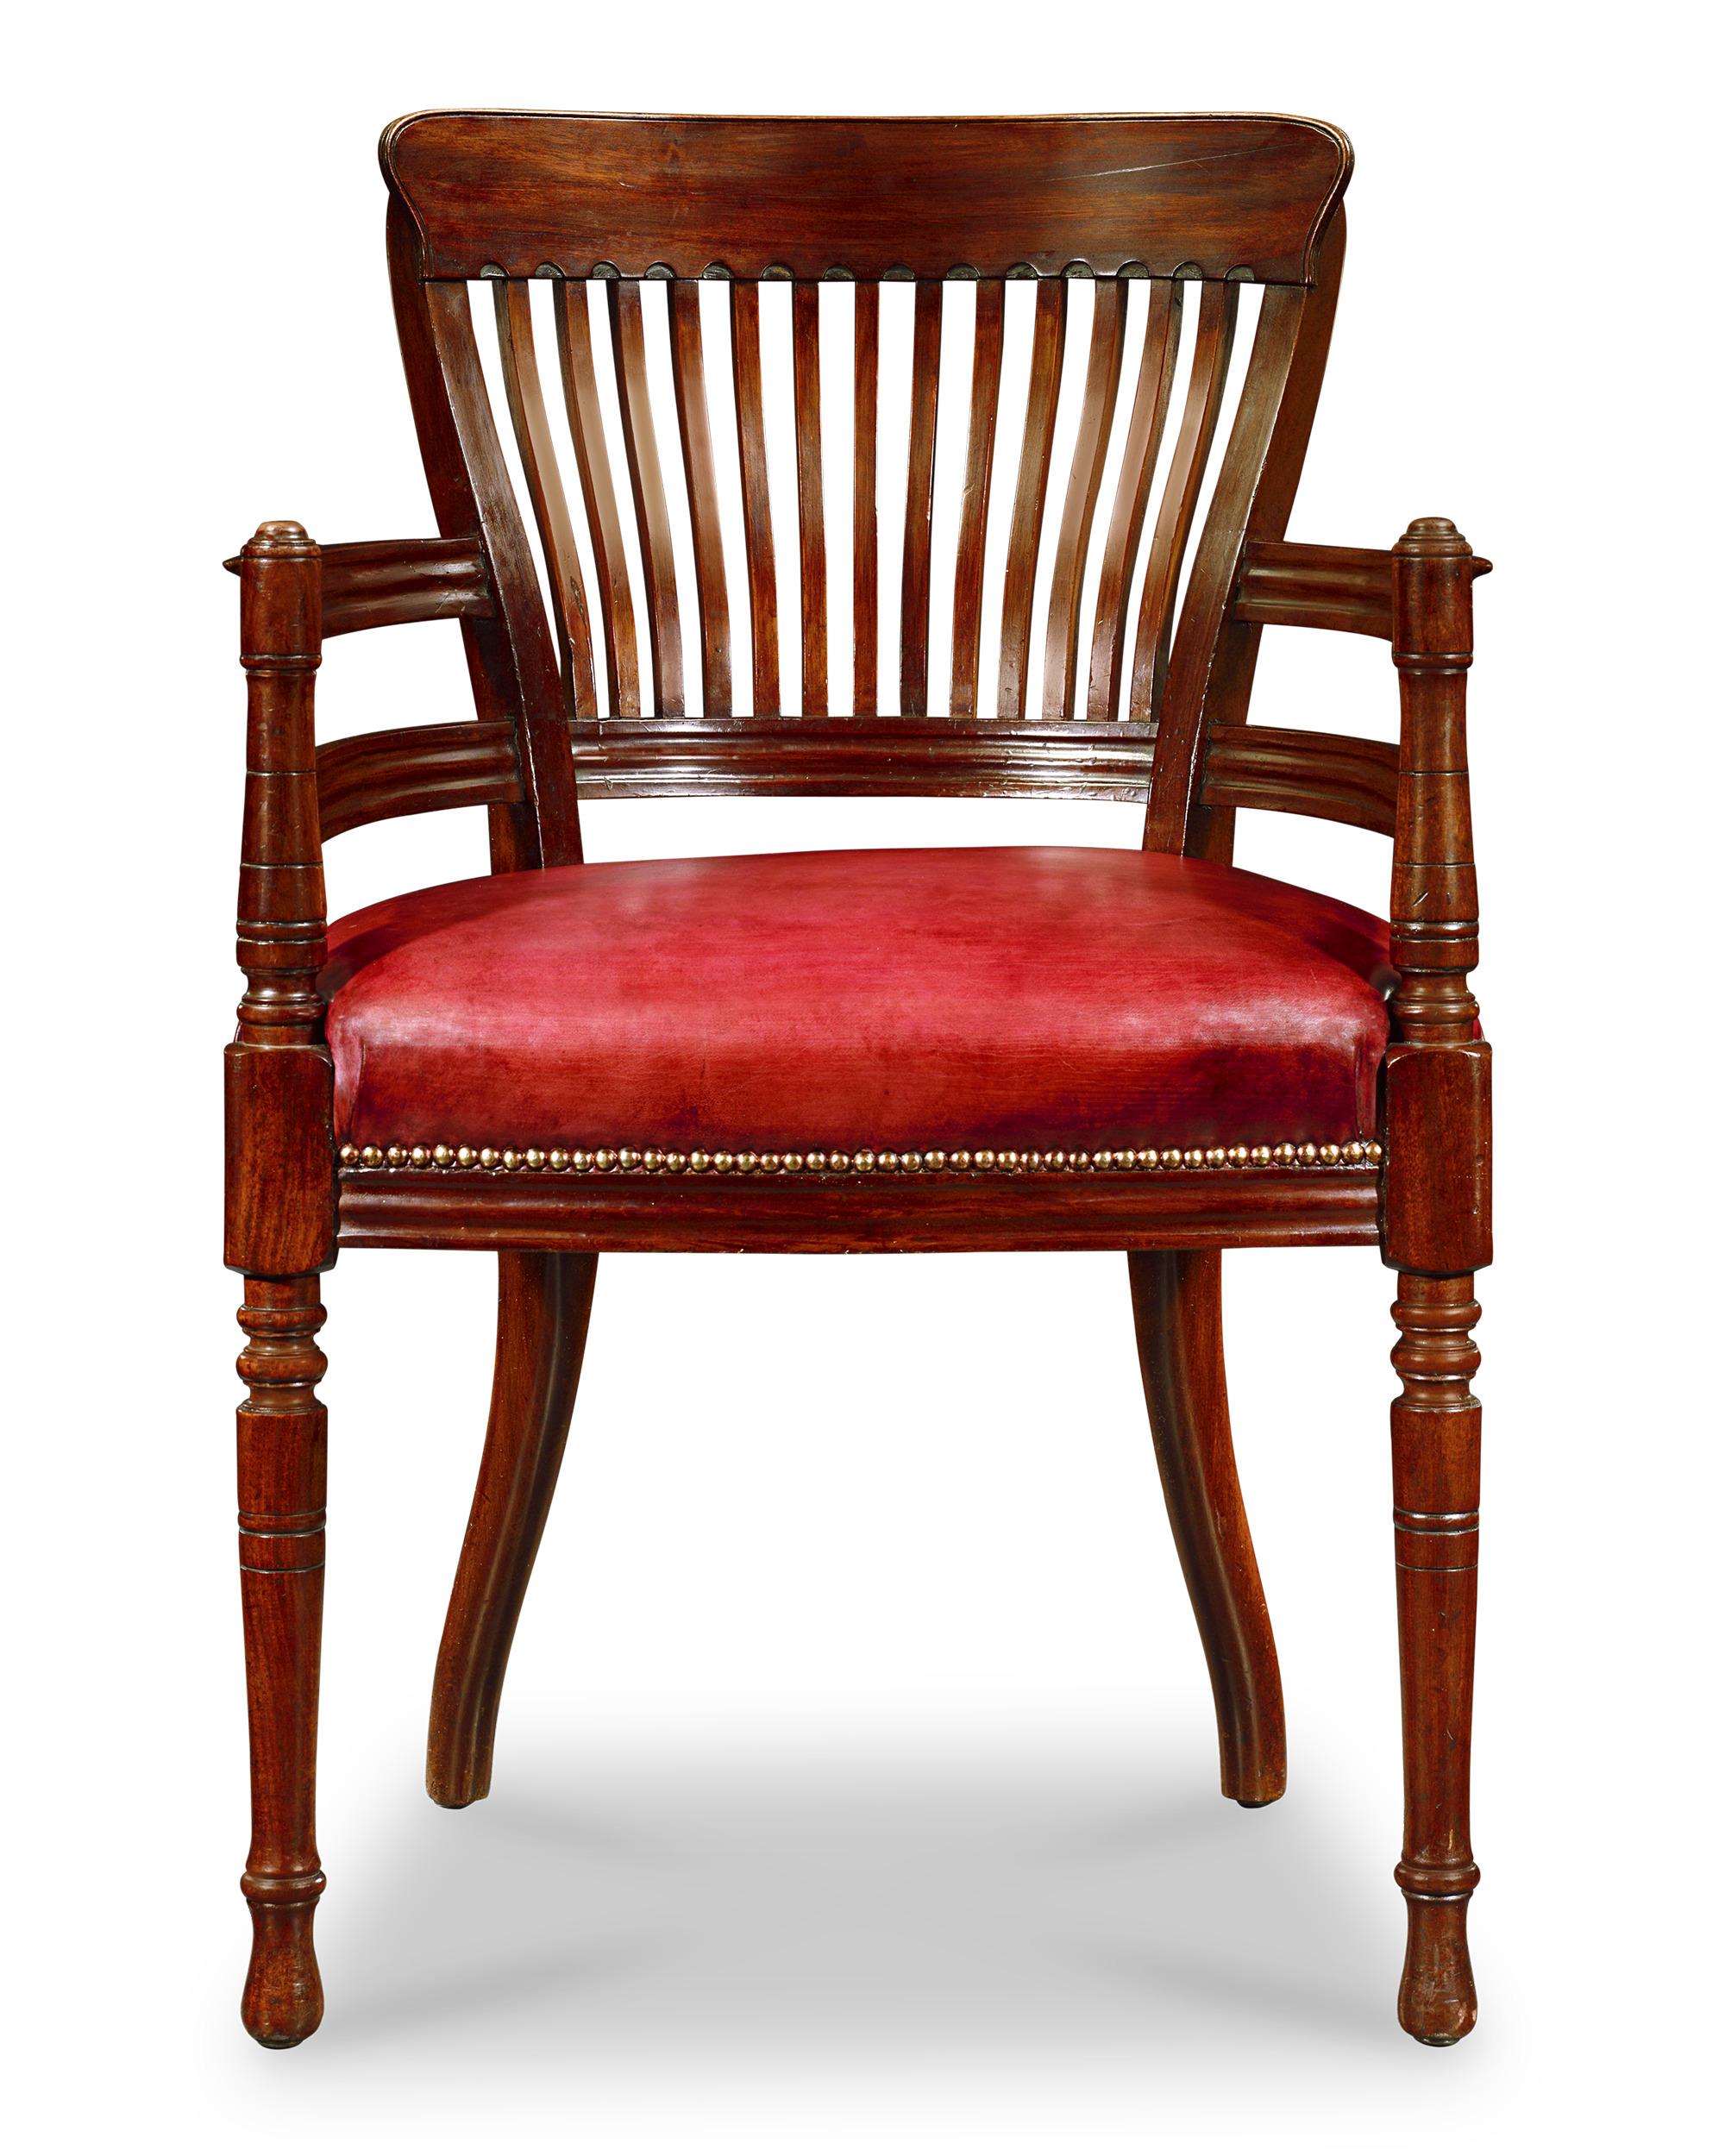 This handsome mahogany desk chair was crafted by progressive English architect-designer Edward William Godwin. The chair reflects the design tenets of the Aesthetic Movement and the nascent beginnings of the Arts and Crafts movement. Punctuated by